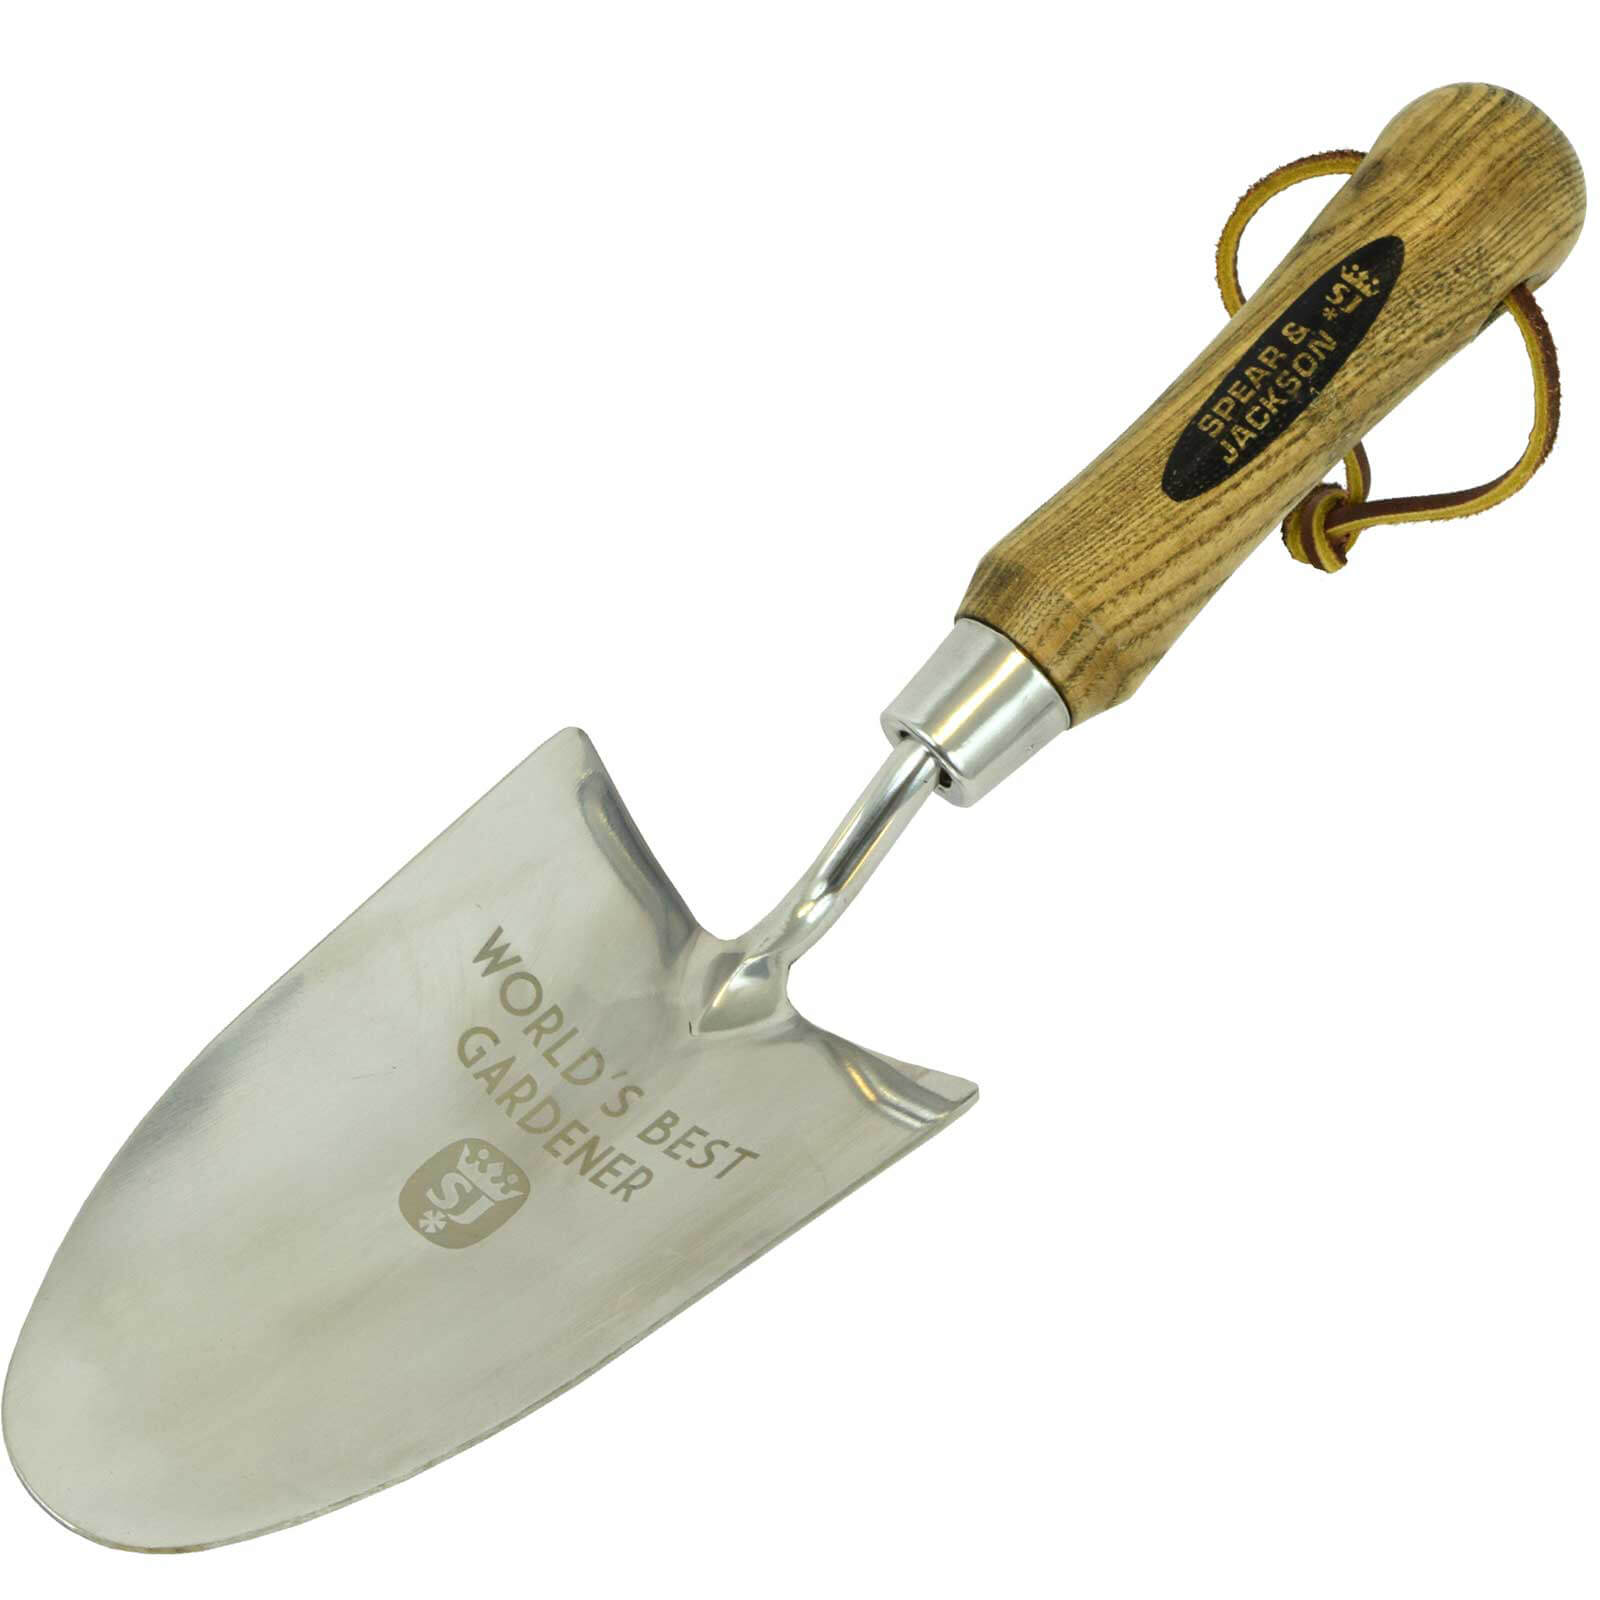 Image of Spear and Jackson Occasions World's Best Gardener Etched Garden Trowel